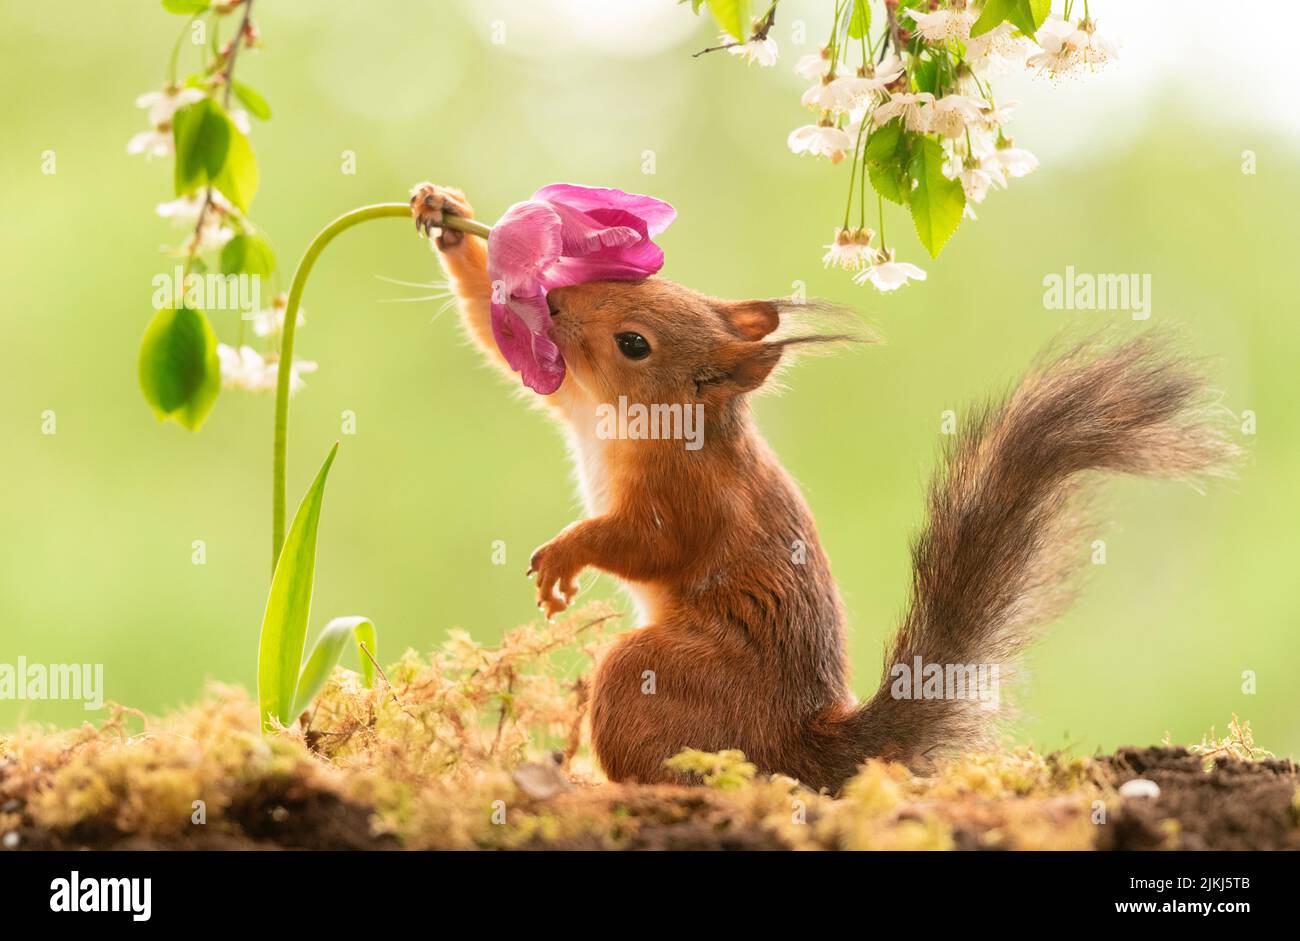 Red Squirrel with a tulip Stock Photo